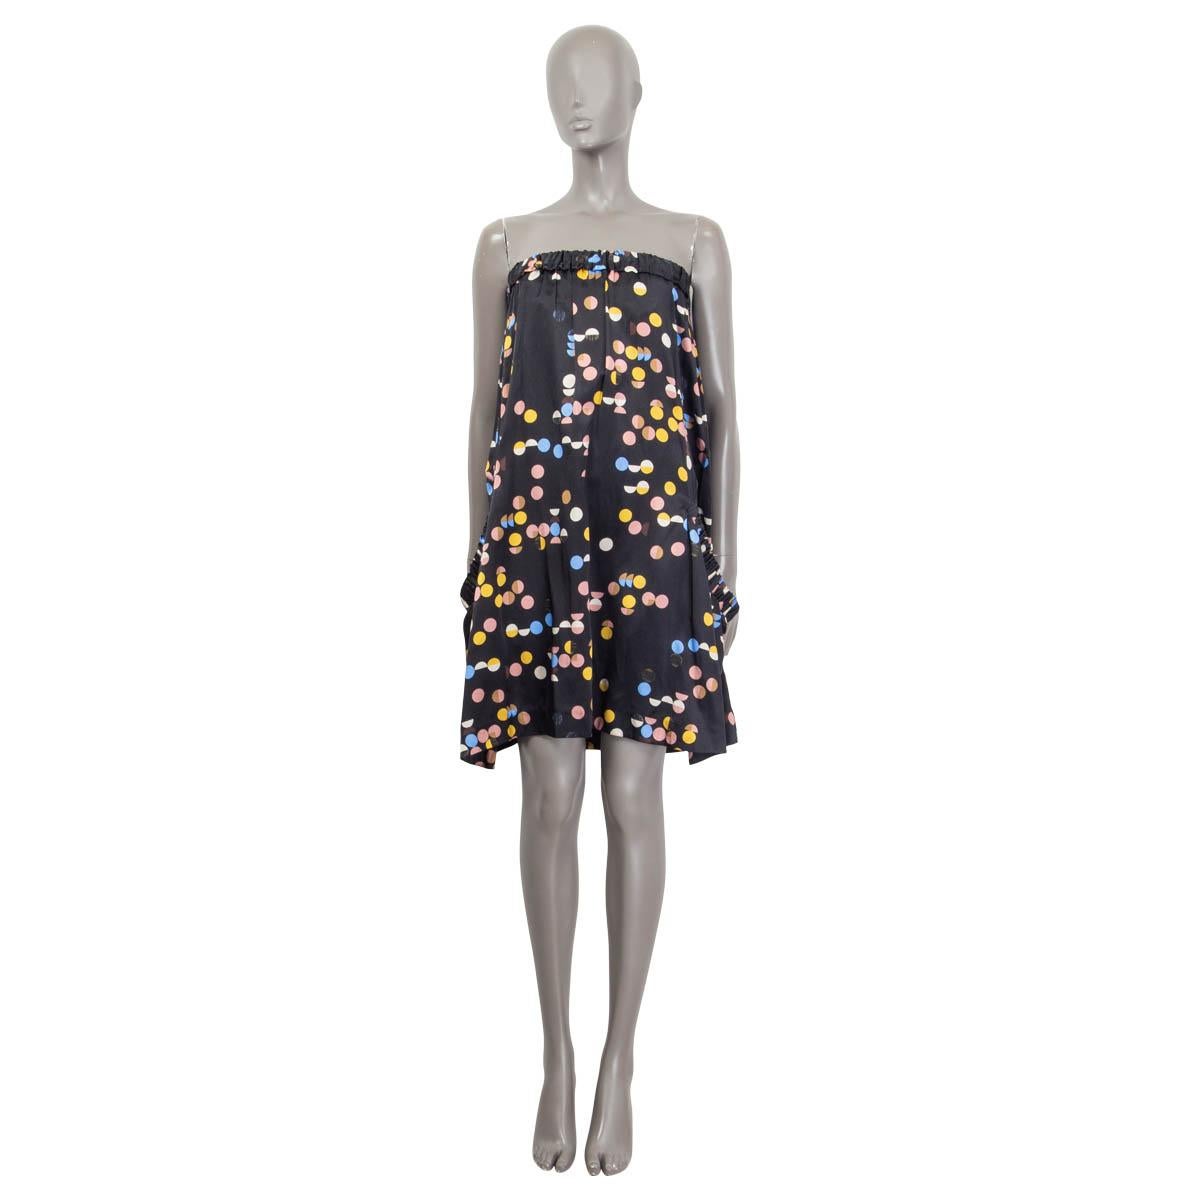 100% authentic Victoria Victoria Beckham dotted strapless satin dress in black, yellow, pink and blue silk (57%) and cotton (43%). Features two slit pockets on the side. Internal corset and dress both open with a zipper and a hook at the back.